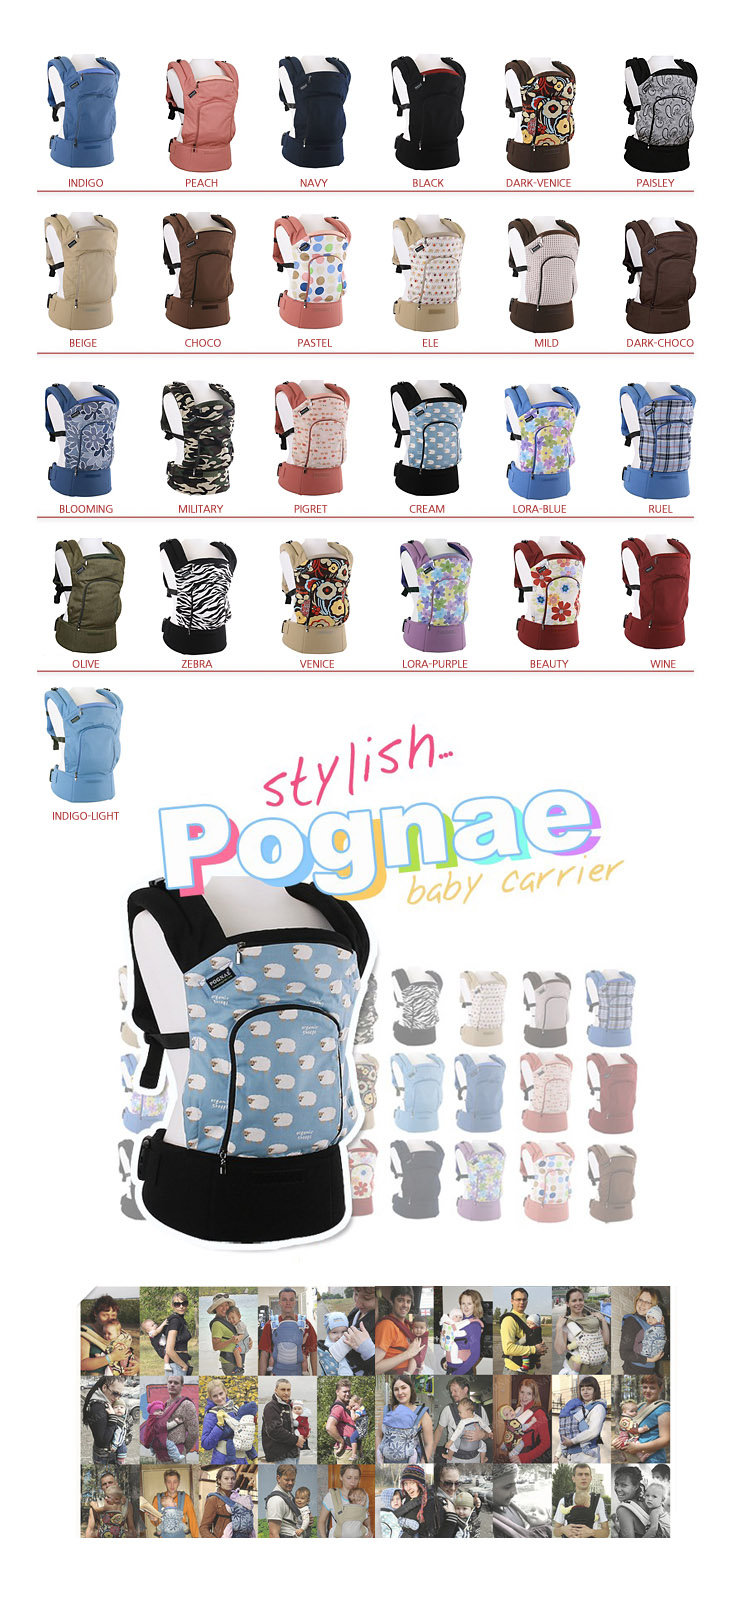 pognae baby carrier price